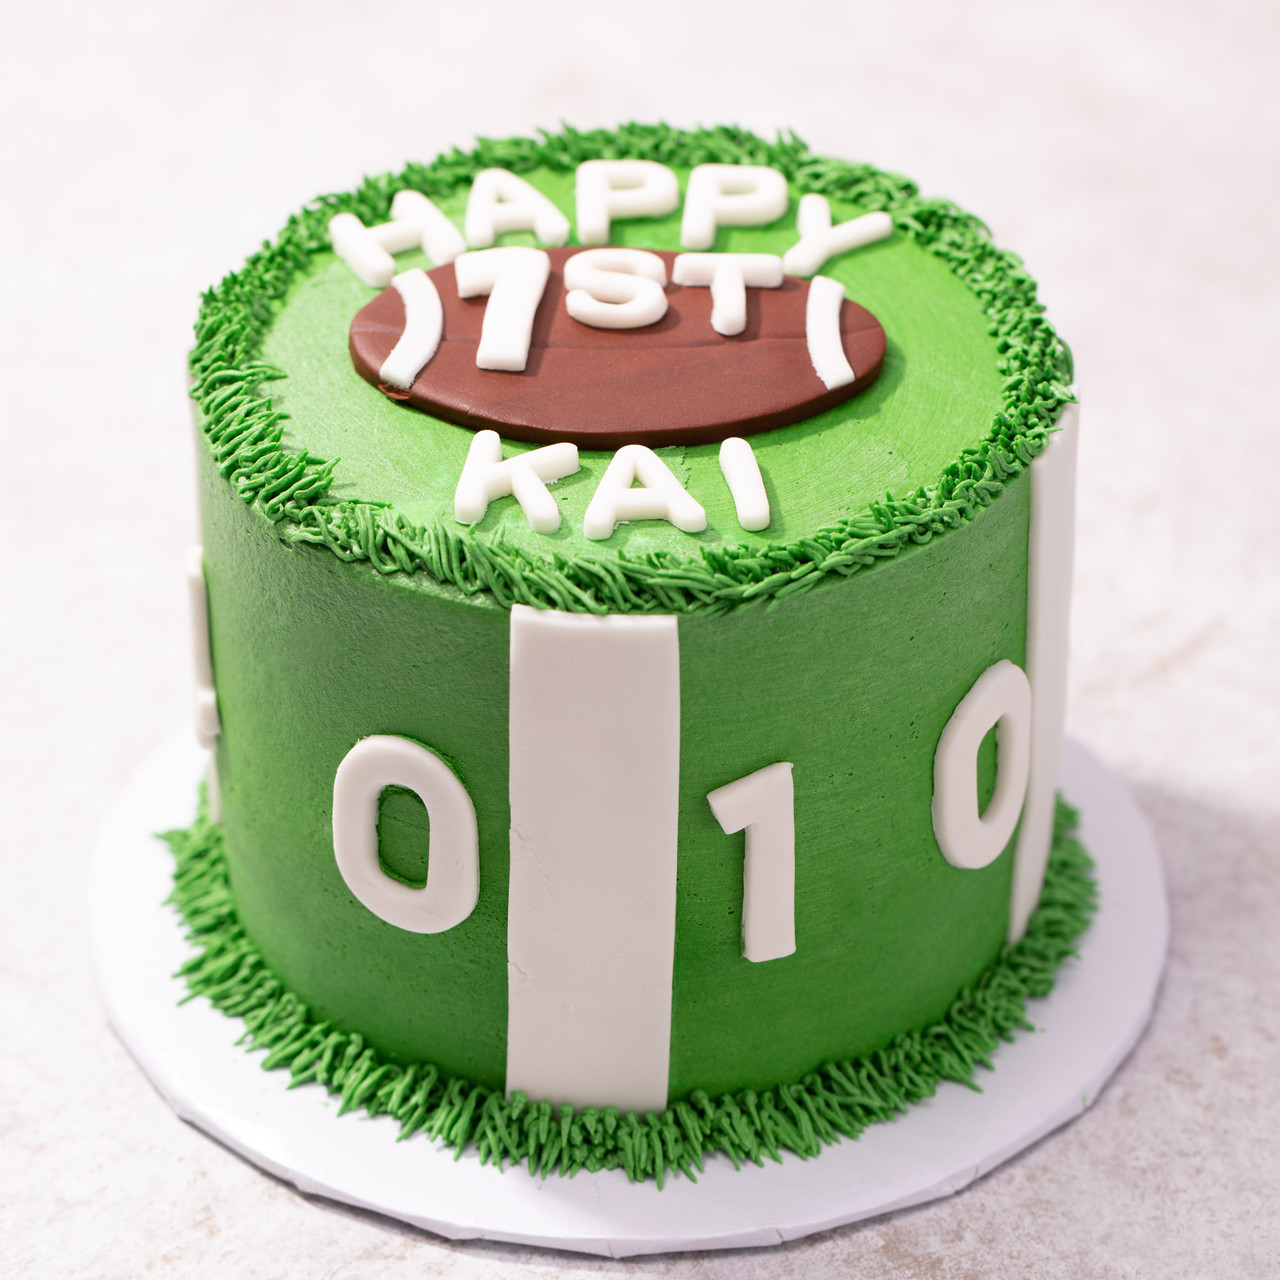 Football field cake 3d on a white background. | CanStock